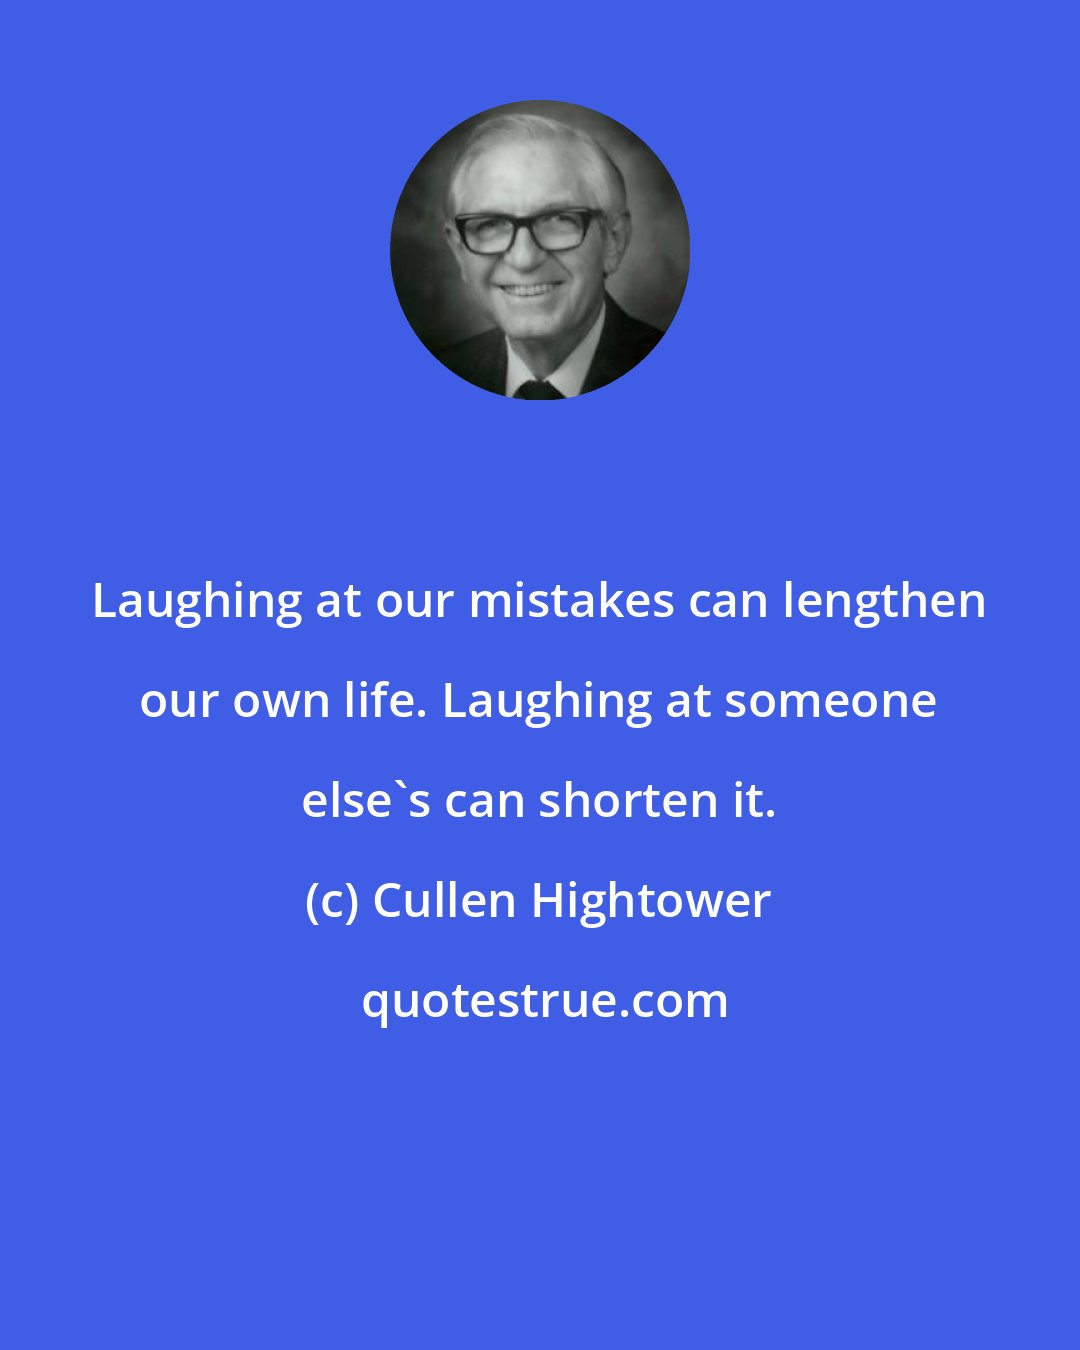 Cullen Hightower: Laughing at our mistakes can lengthen our own life. Laughing at someone else's can shorten it.